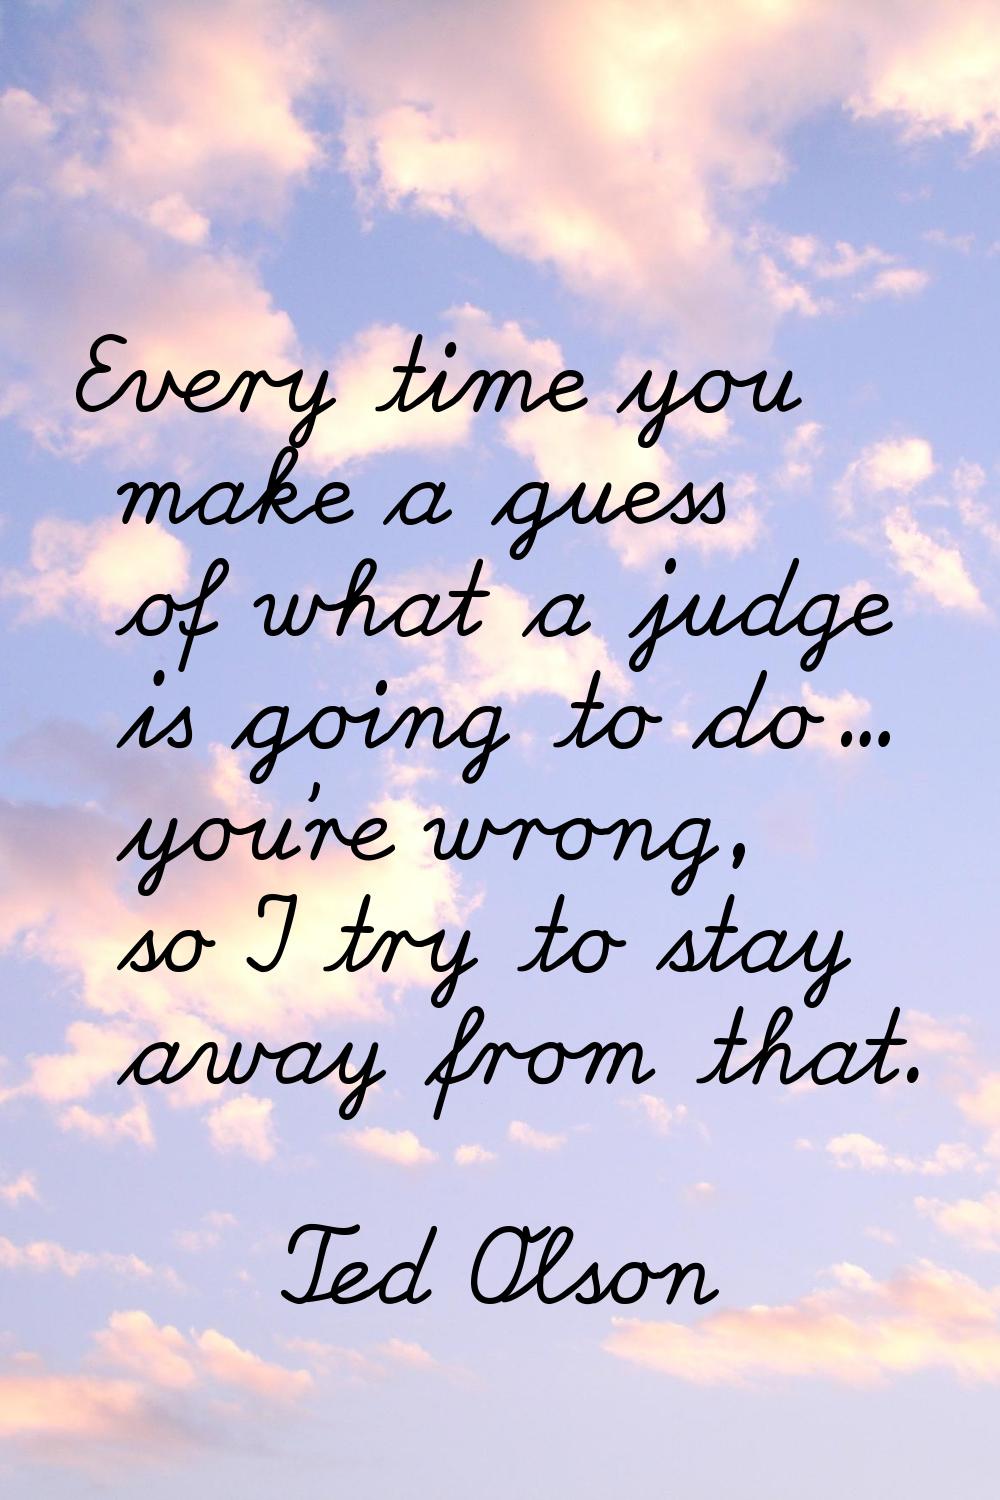 Every time you make a guess of what a judge is going to do... you're wrong, so I try to stay away f